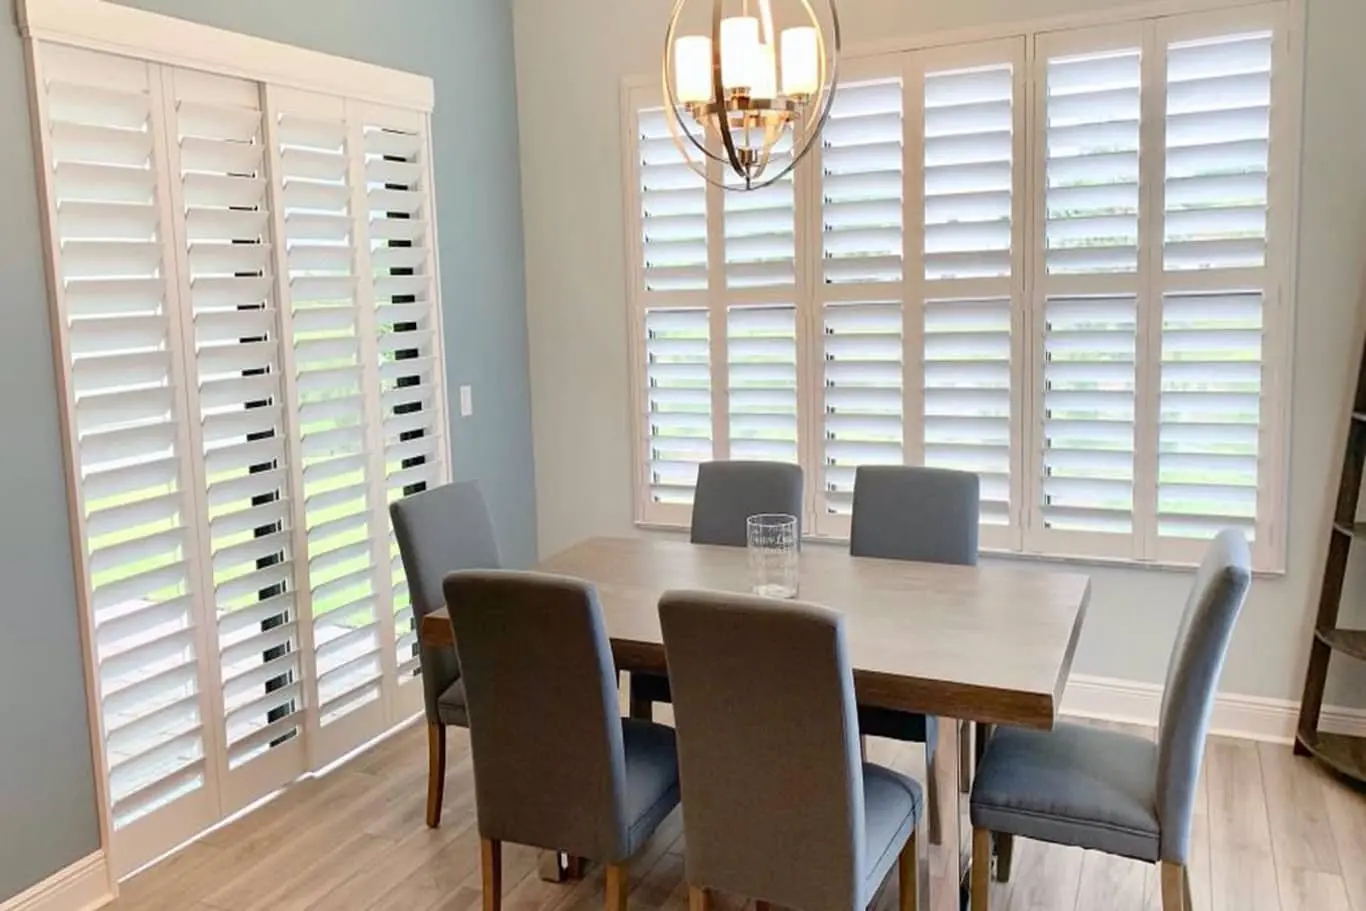 Are Shutters Out of Style?